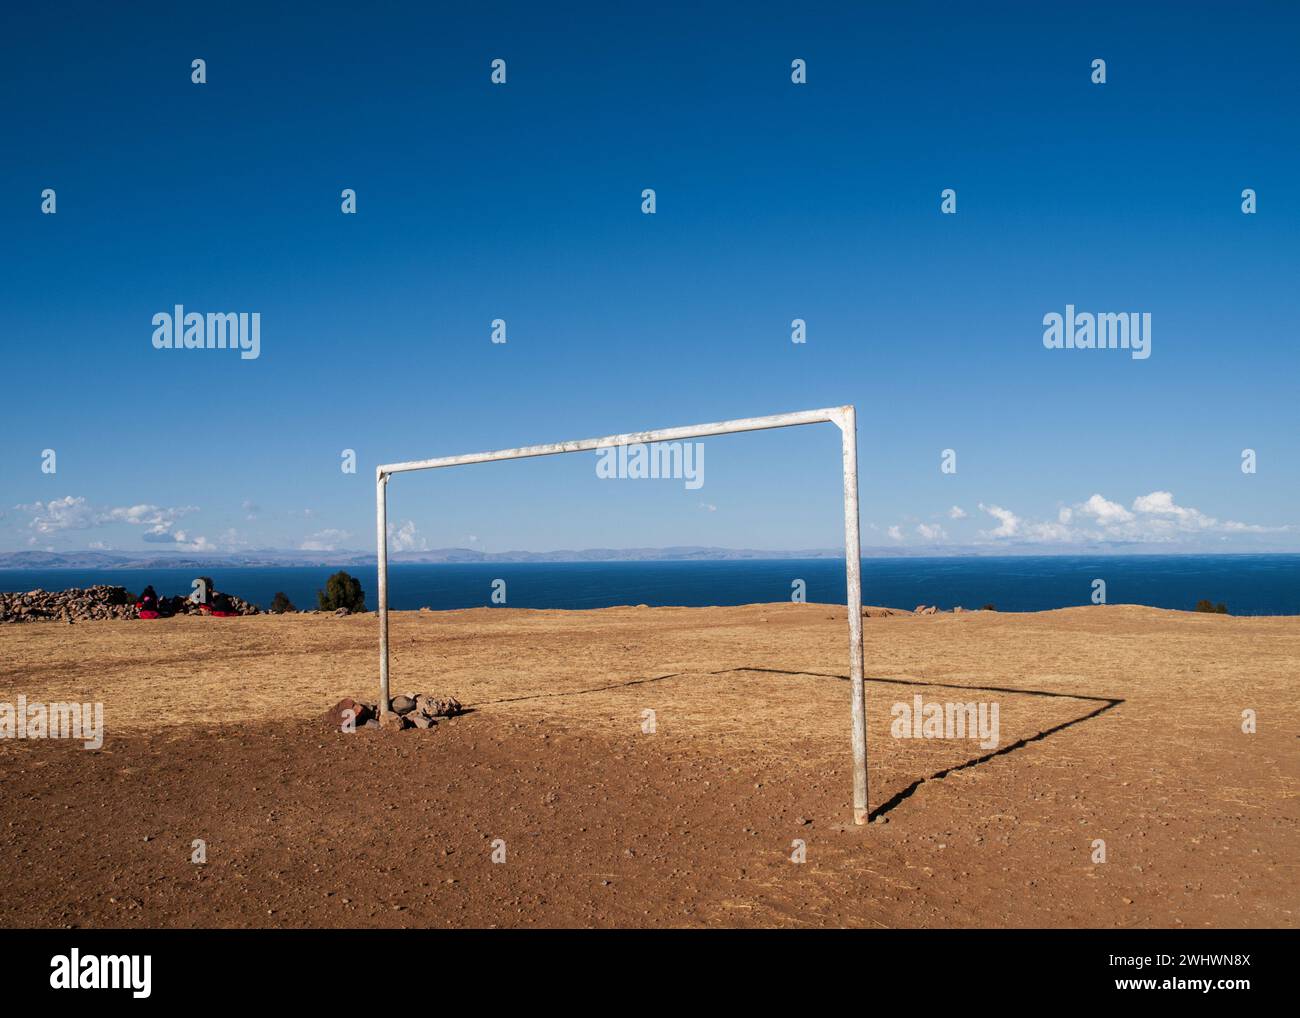 Landscape photograph on Amantani Island of a soccer goal on a sand field with Lake Titicaca in the background, Peru Stock Photo